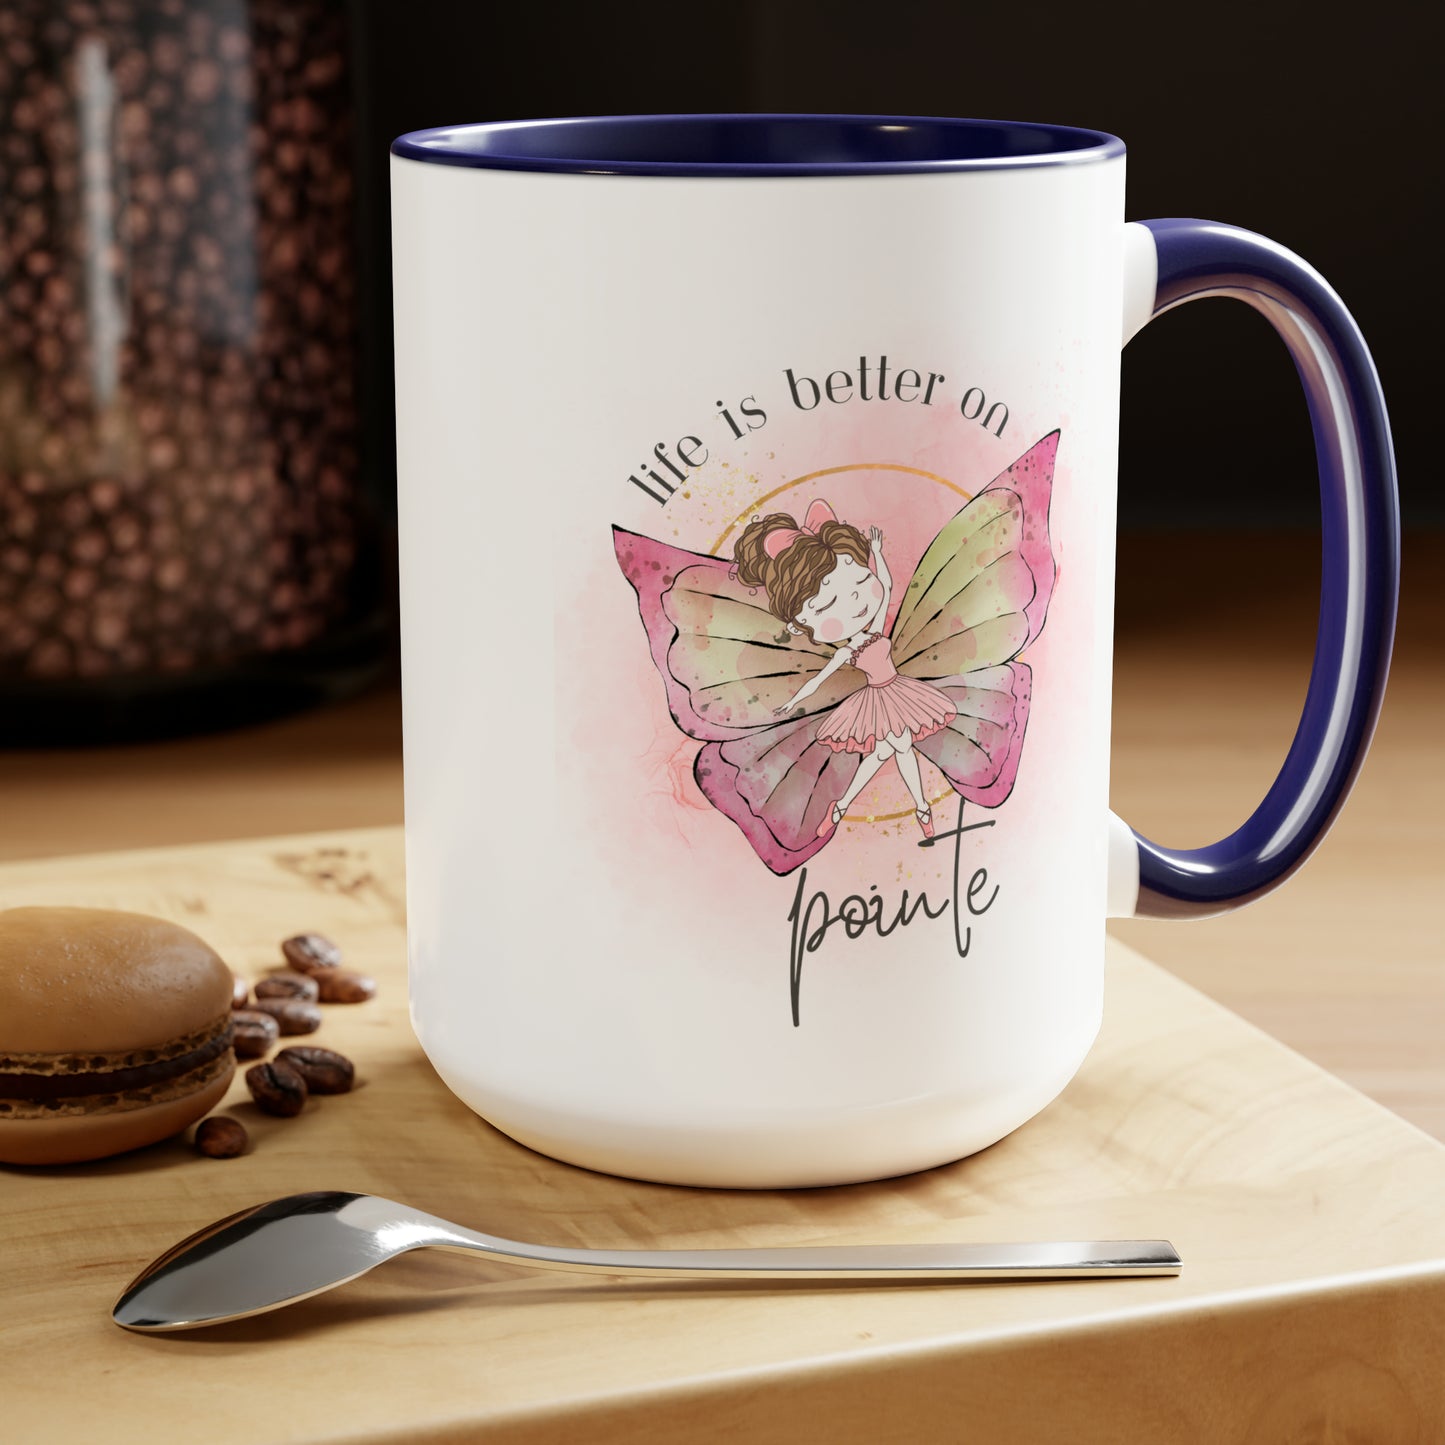 Two-Tone Coffee Mugs, 15oz - Young Ballerina with butterfly wings - royal blue rim